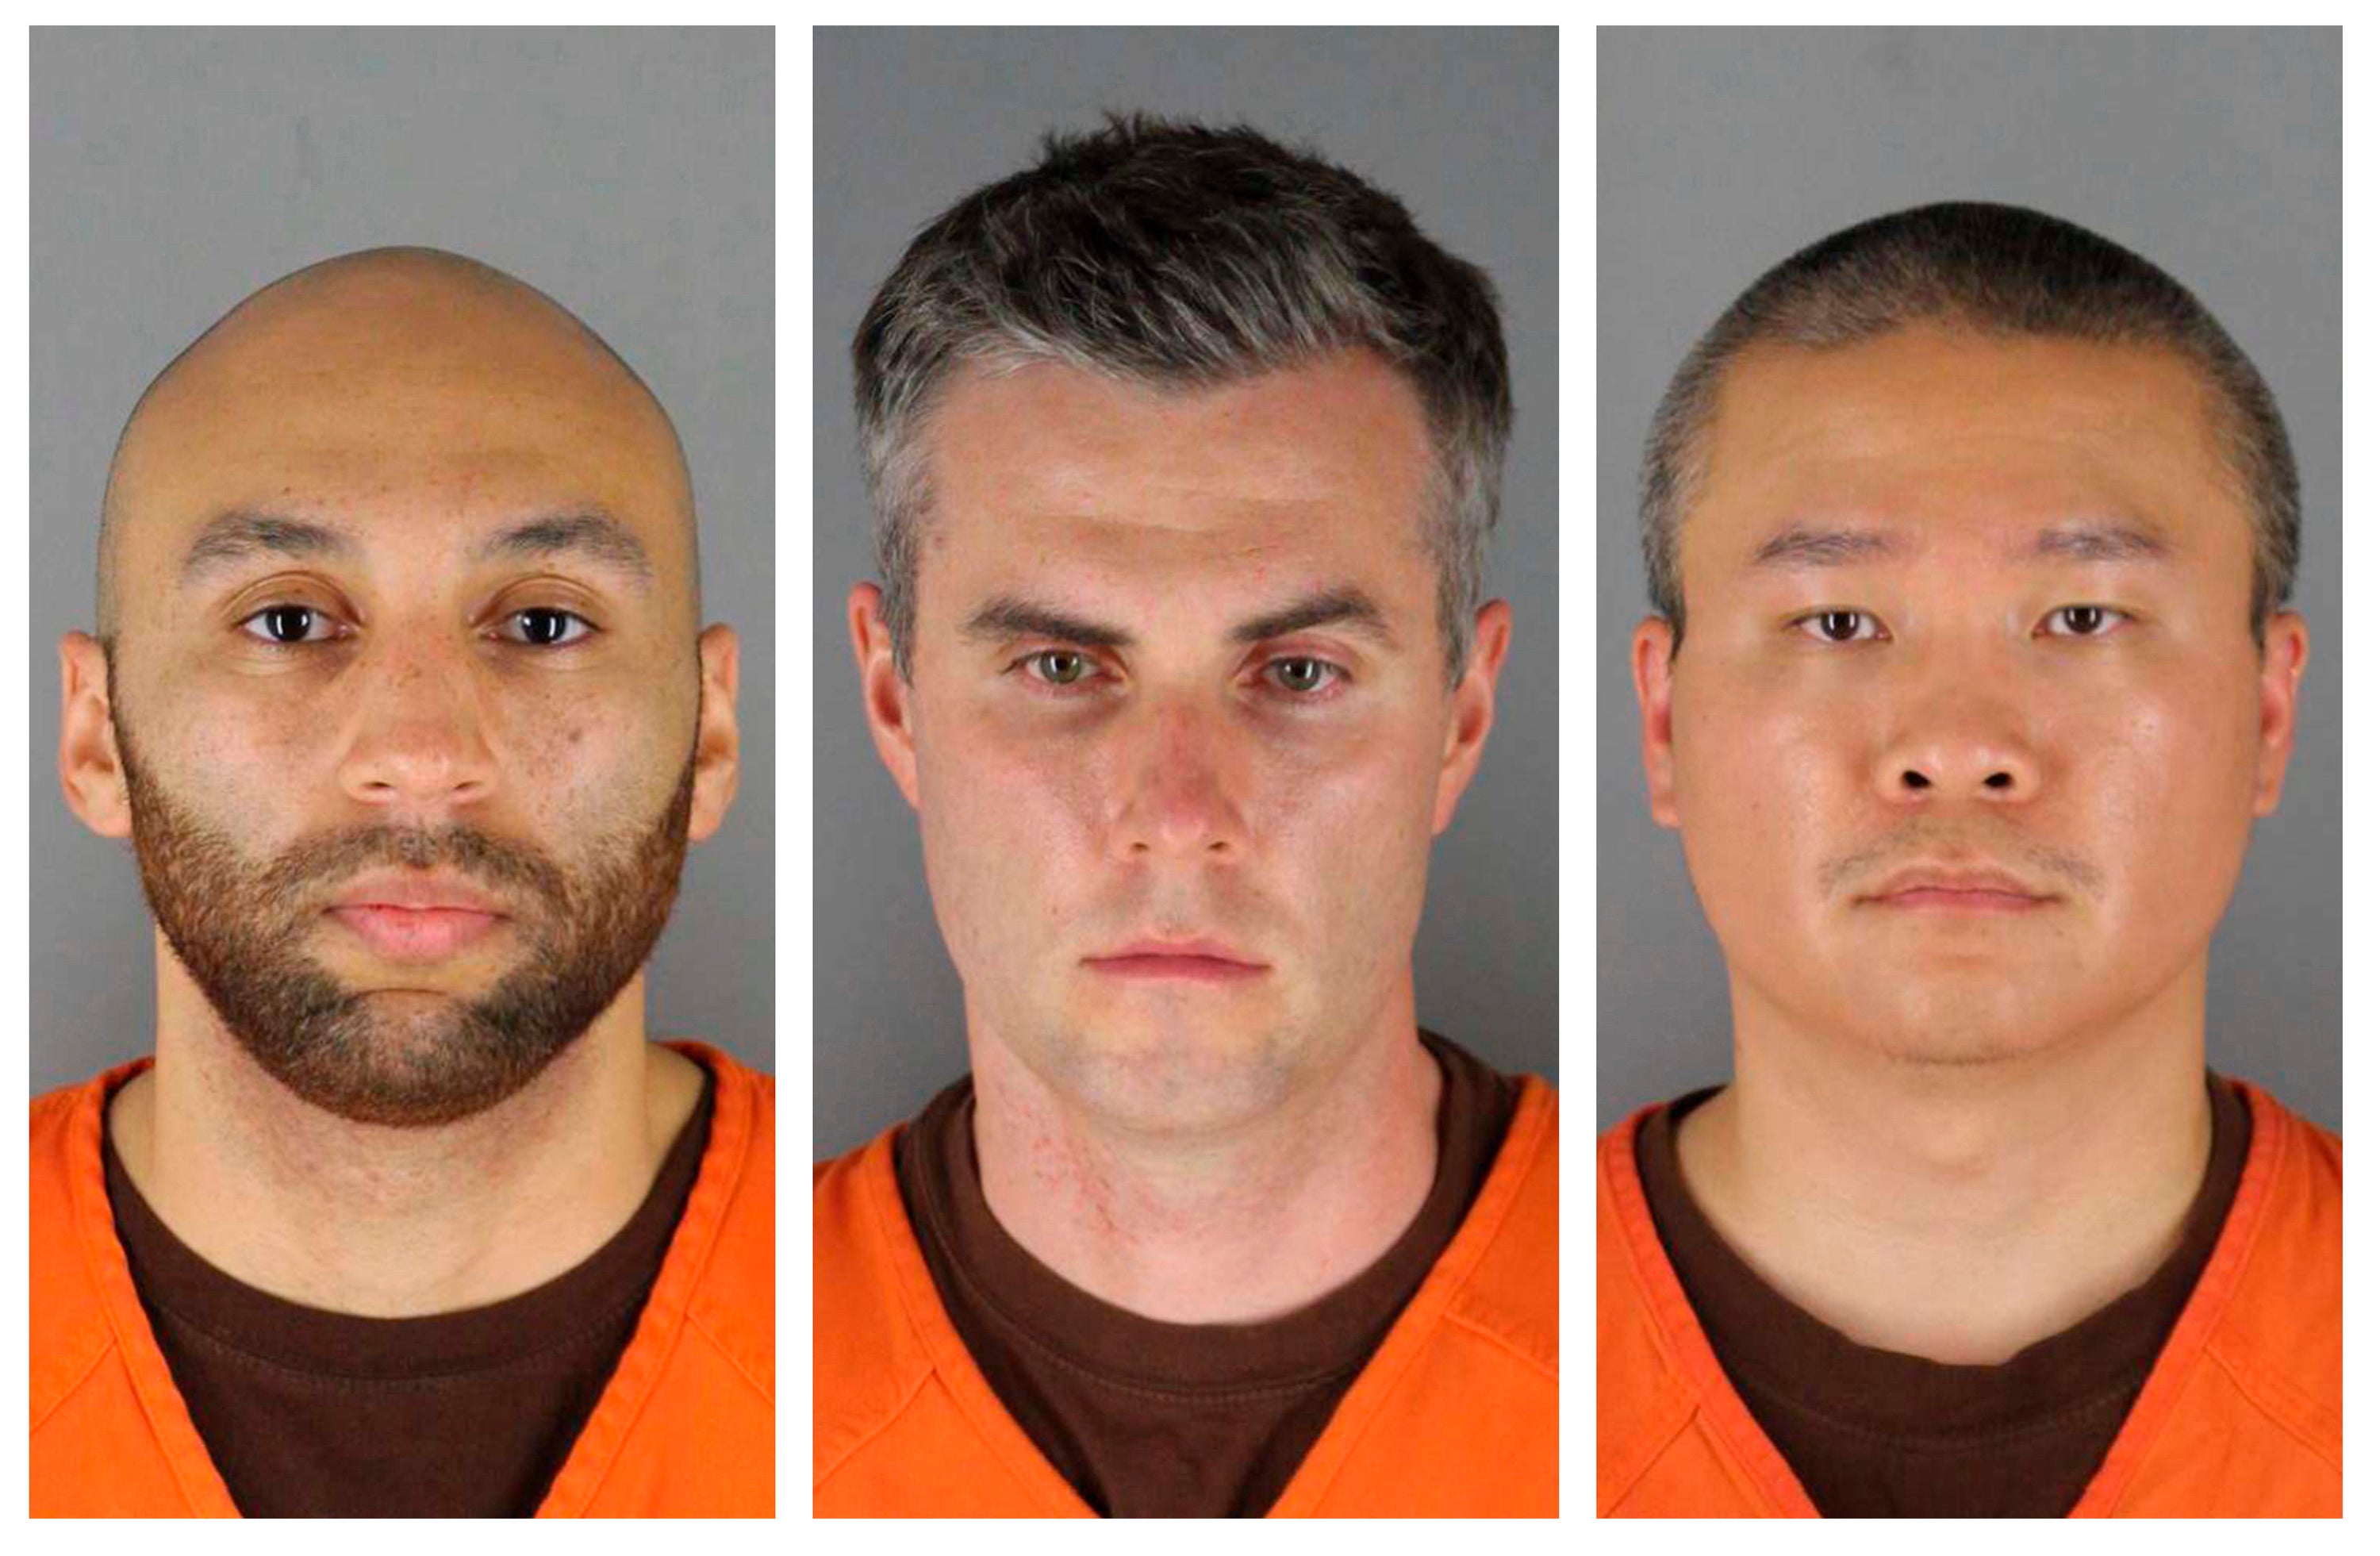 J Alexander Kueng, Thomas Lane and Tou Thao left to right in booking photos